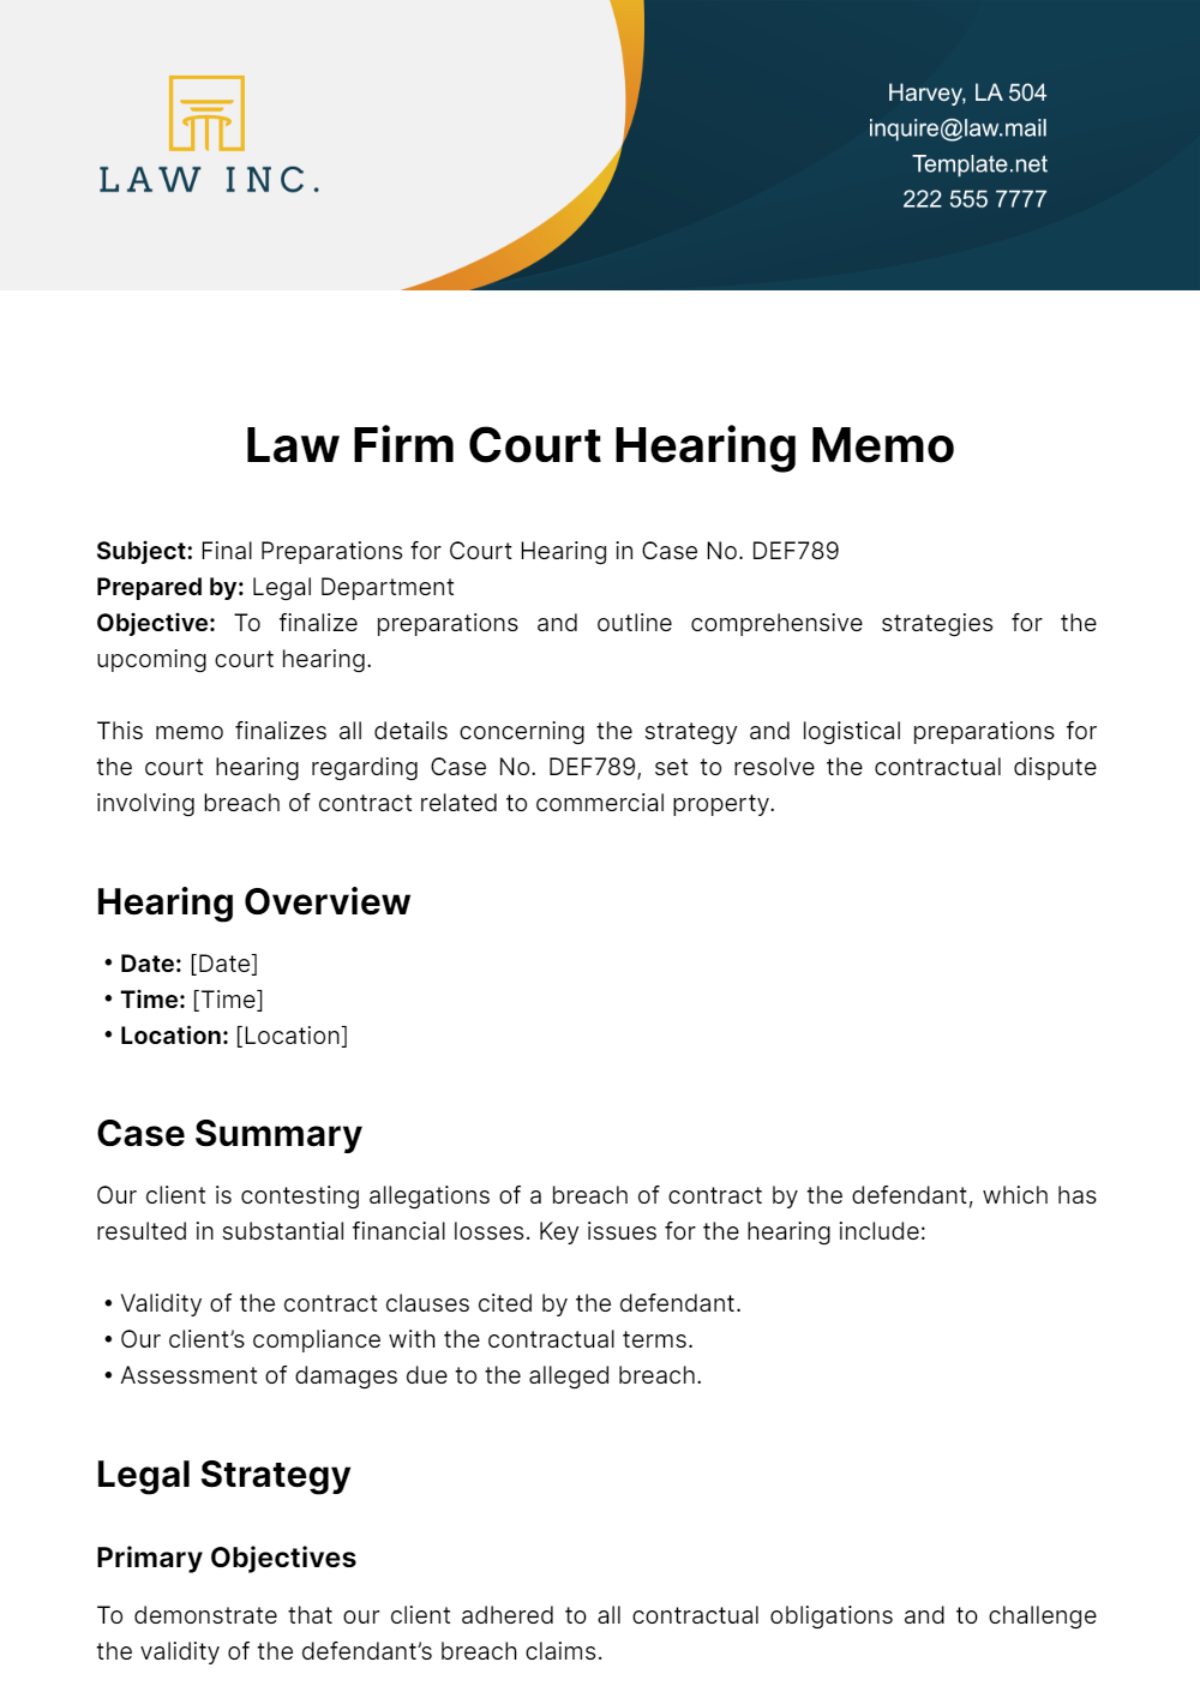 Law Firm Court Hearing Memo Template